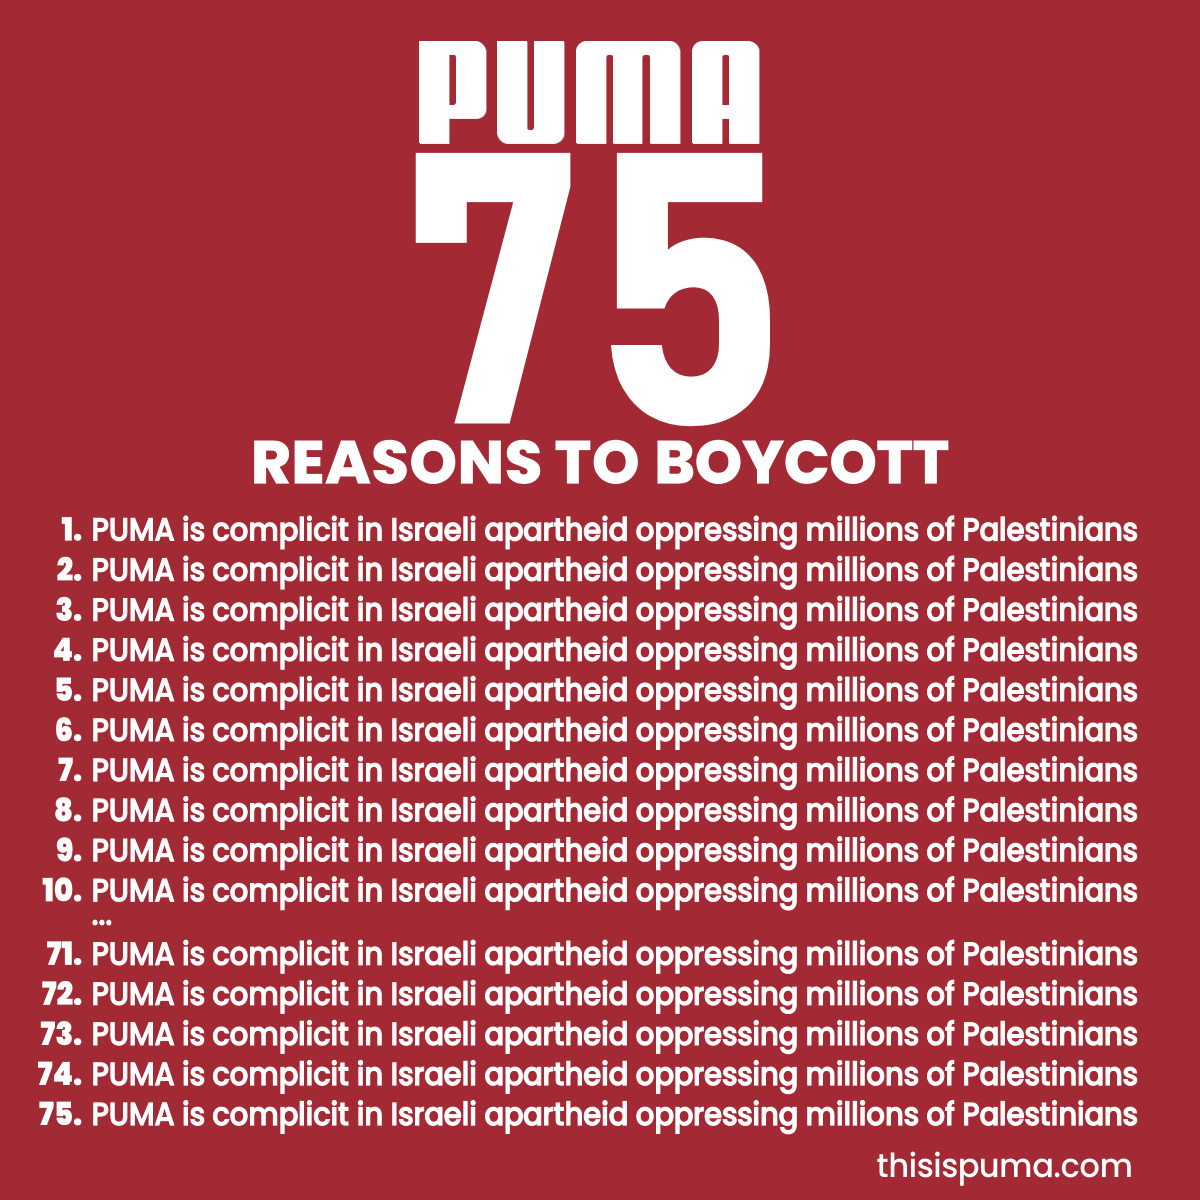 As PUMA shareholders meet to celebrate its 75th anniversary, Palestinians are marking 75 years of apartheid Israel’s oppression.

@PUMA is complicit. 

Learn more and send a message to shareholders:
thisispuma.com

#ThisIsPUMA #BoycottPUMA #ForeverFaster #Nakba75